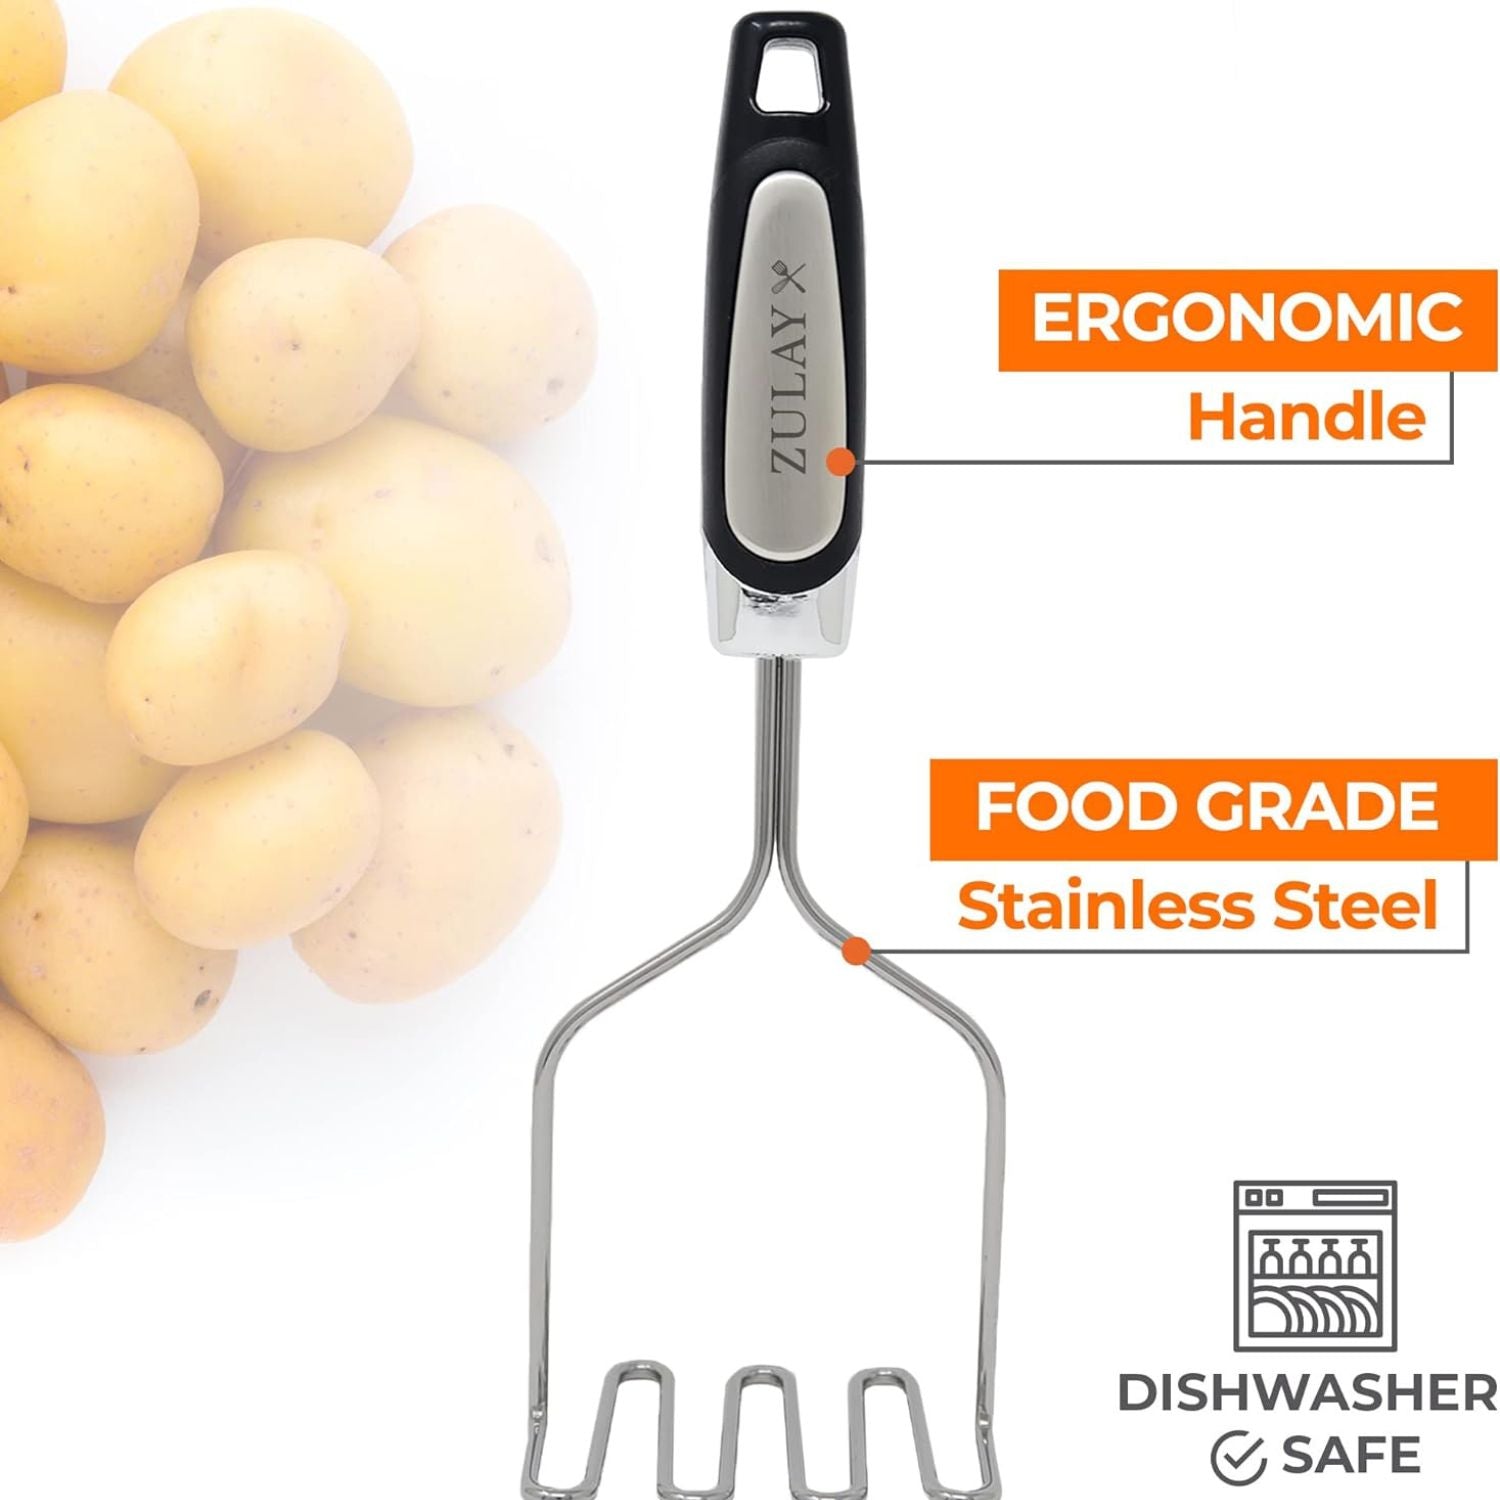 Heavy Duty Stainless Steel Potato Masher, Professional Integrated Masher  Kitchen Tool & Food Masher/ Potato Smasher With Silicone Handle, Perfect  For